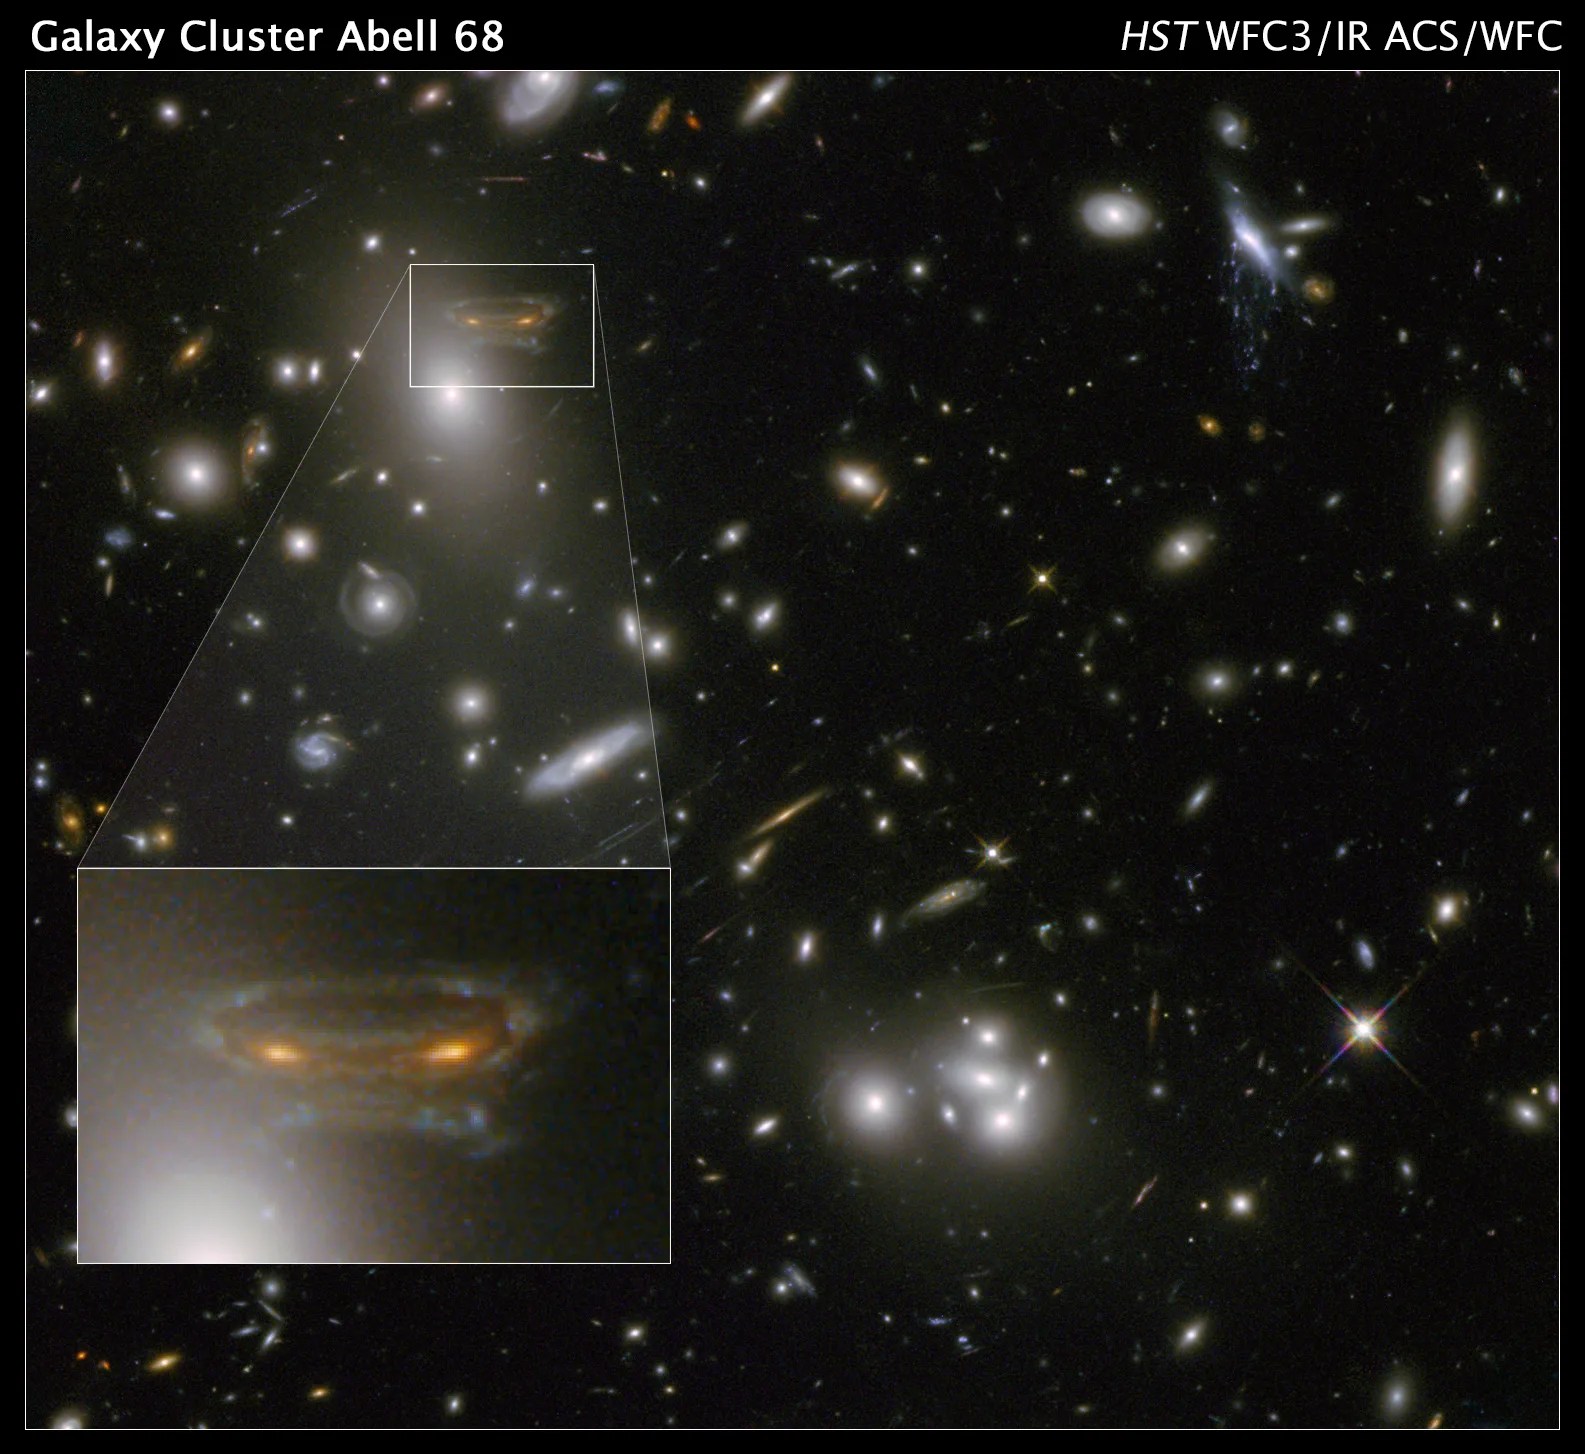 Hubble image of Abell 68 galaxy cluster